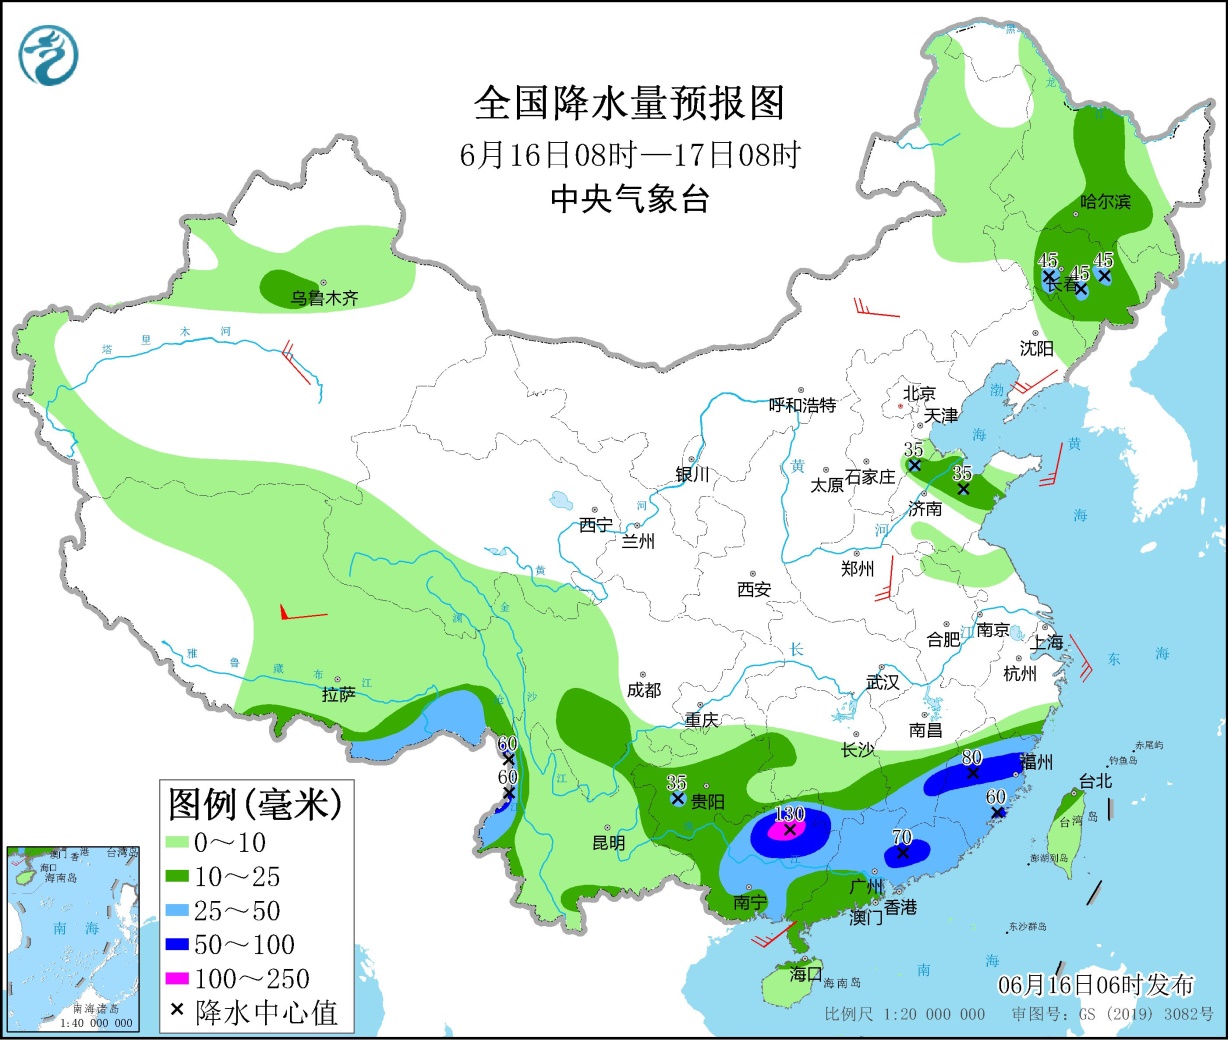 There is still heavy precipitation in South China, Jiangnan and other places, and persistent high temperature weather will occur in North China, Huanghuai and other places